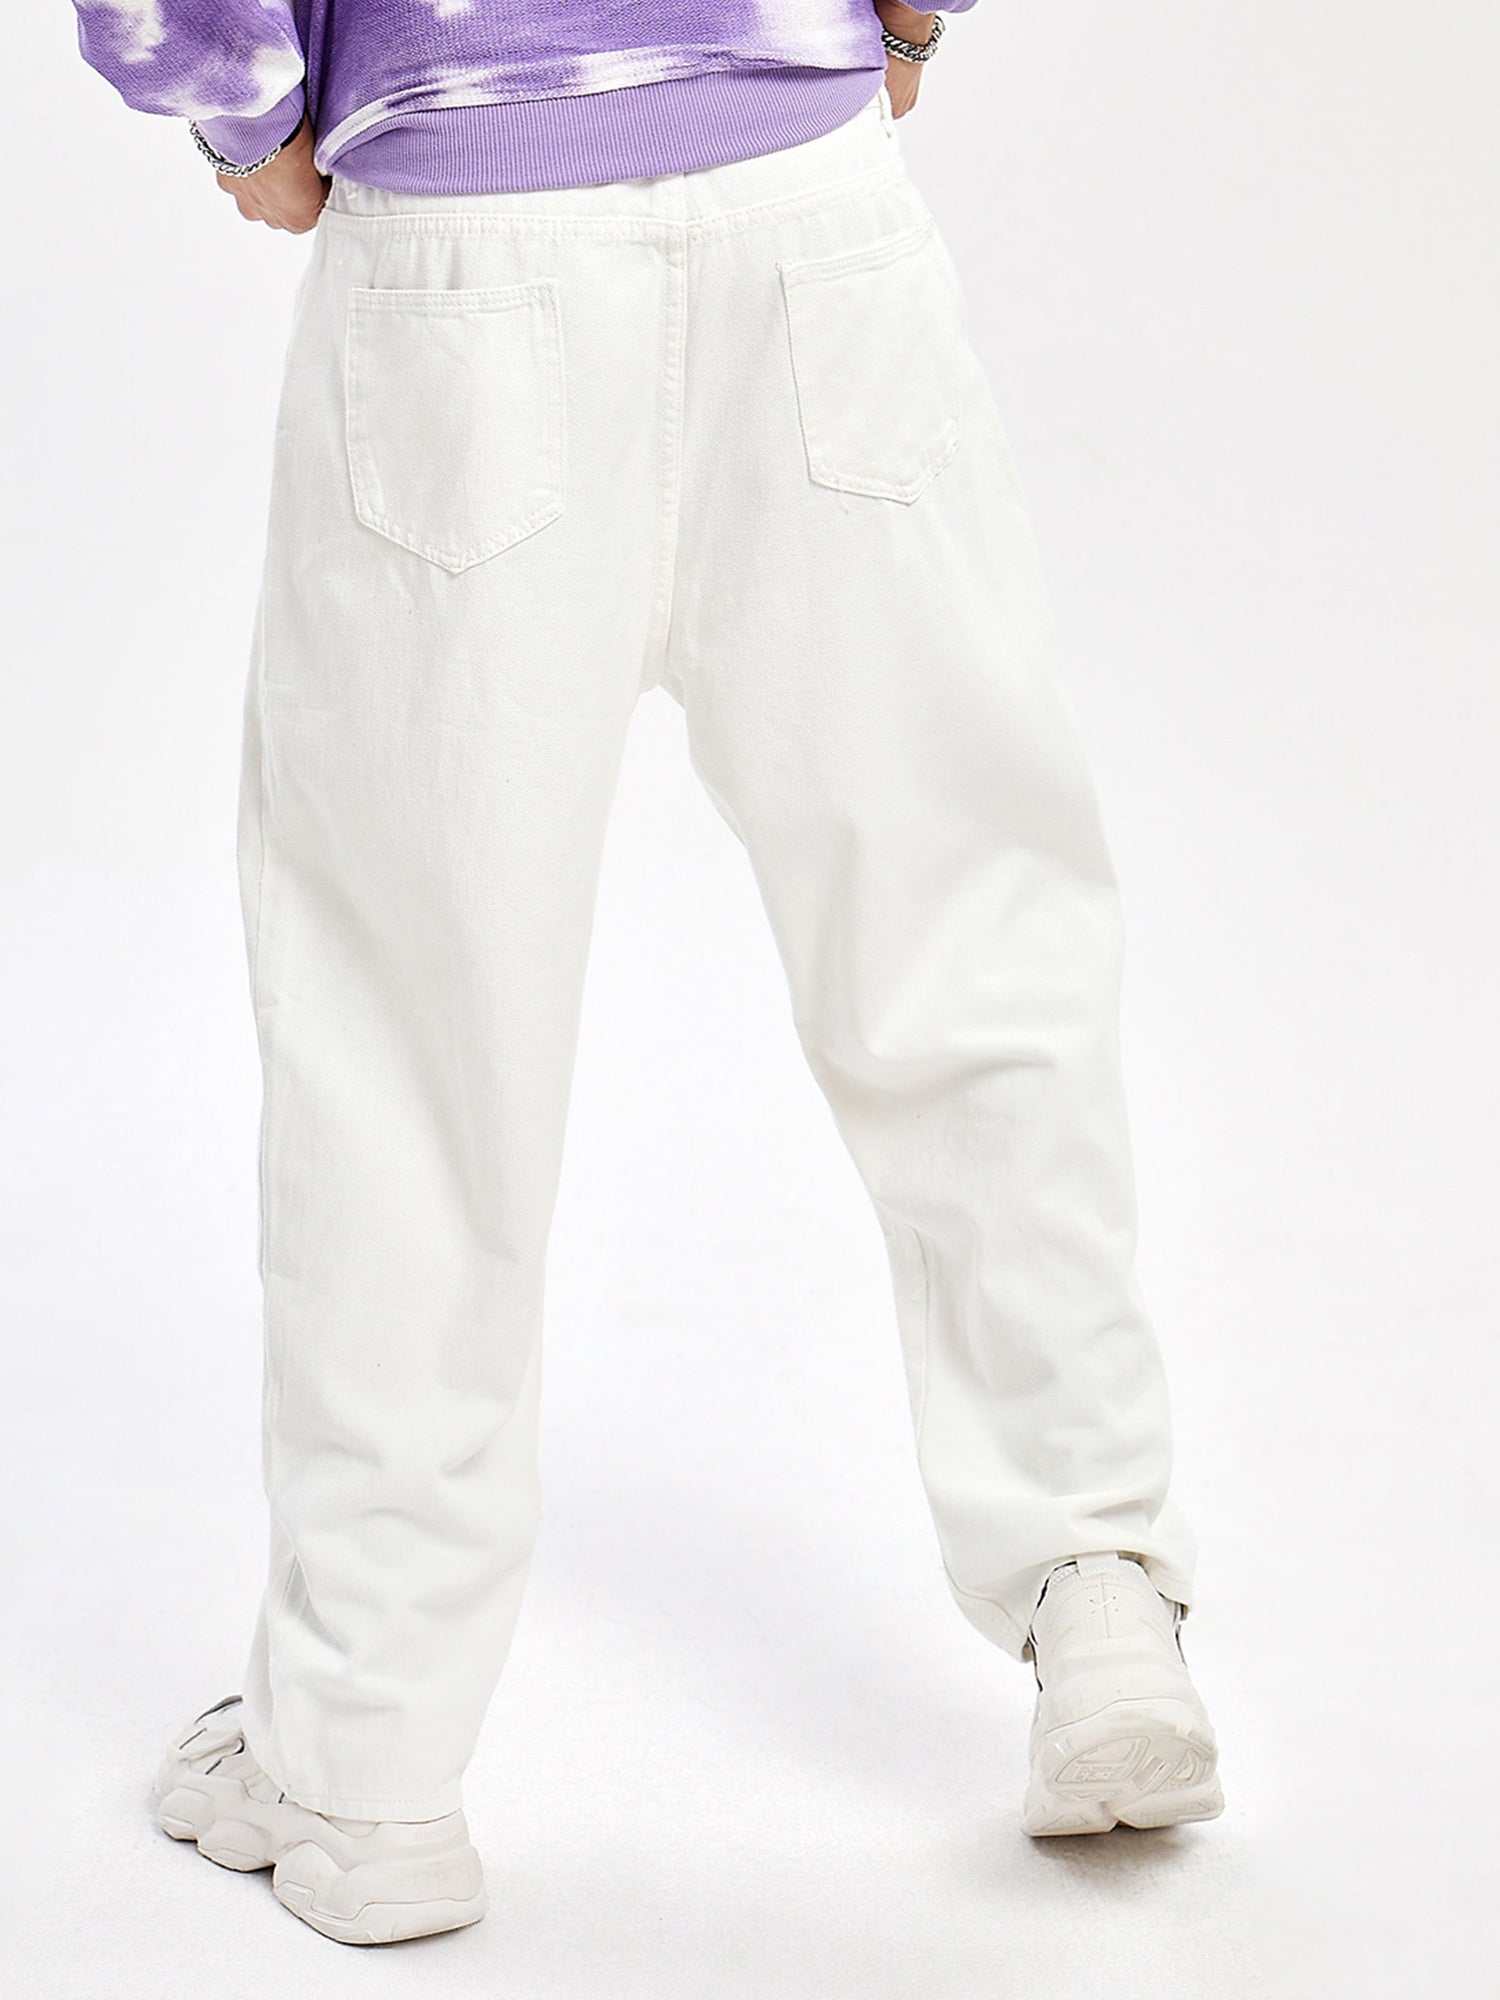 JUSTNOTAG Casual Street HipHop Print White Long Loose Jeans